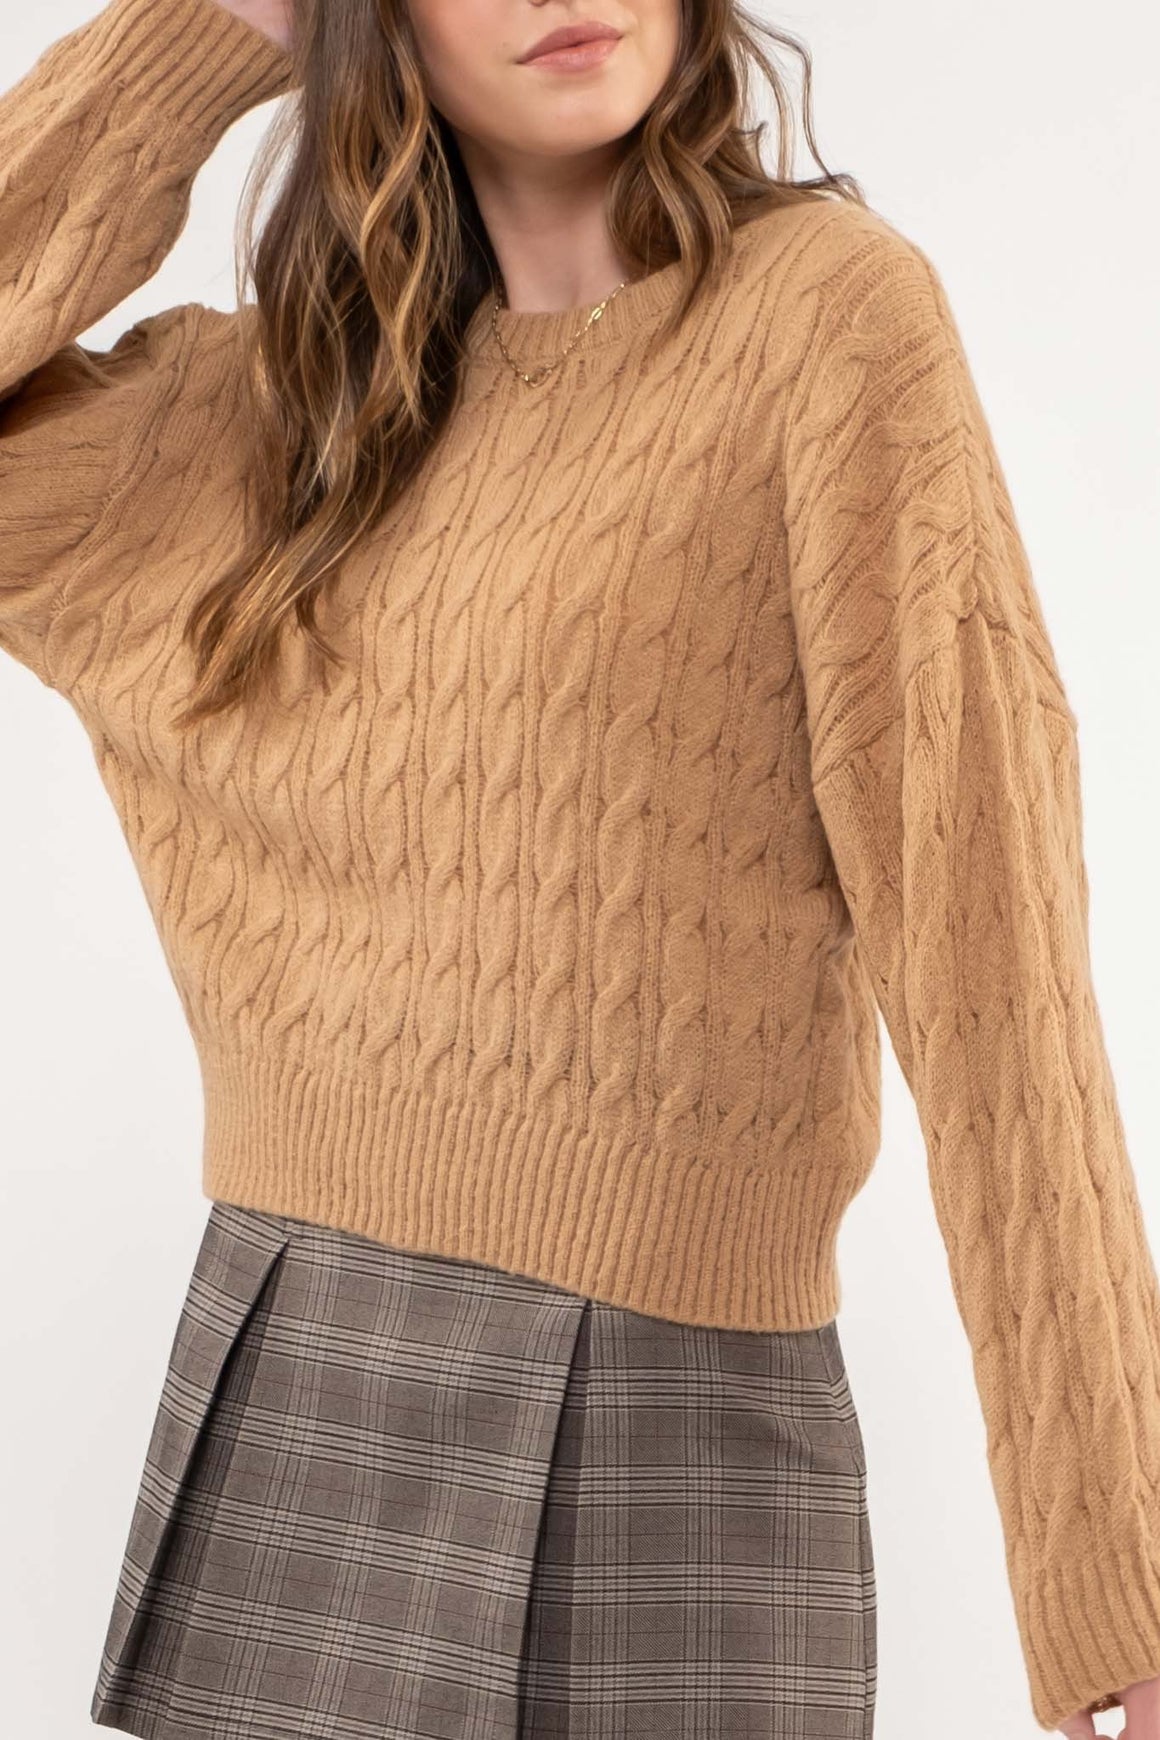 Merida Cable Knit Sweater